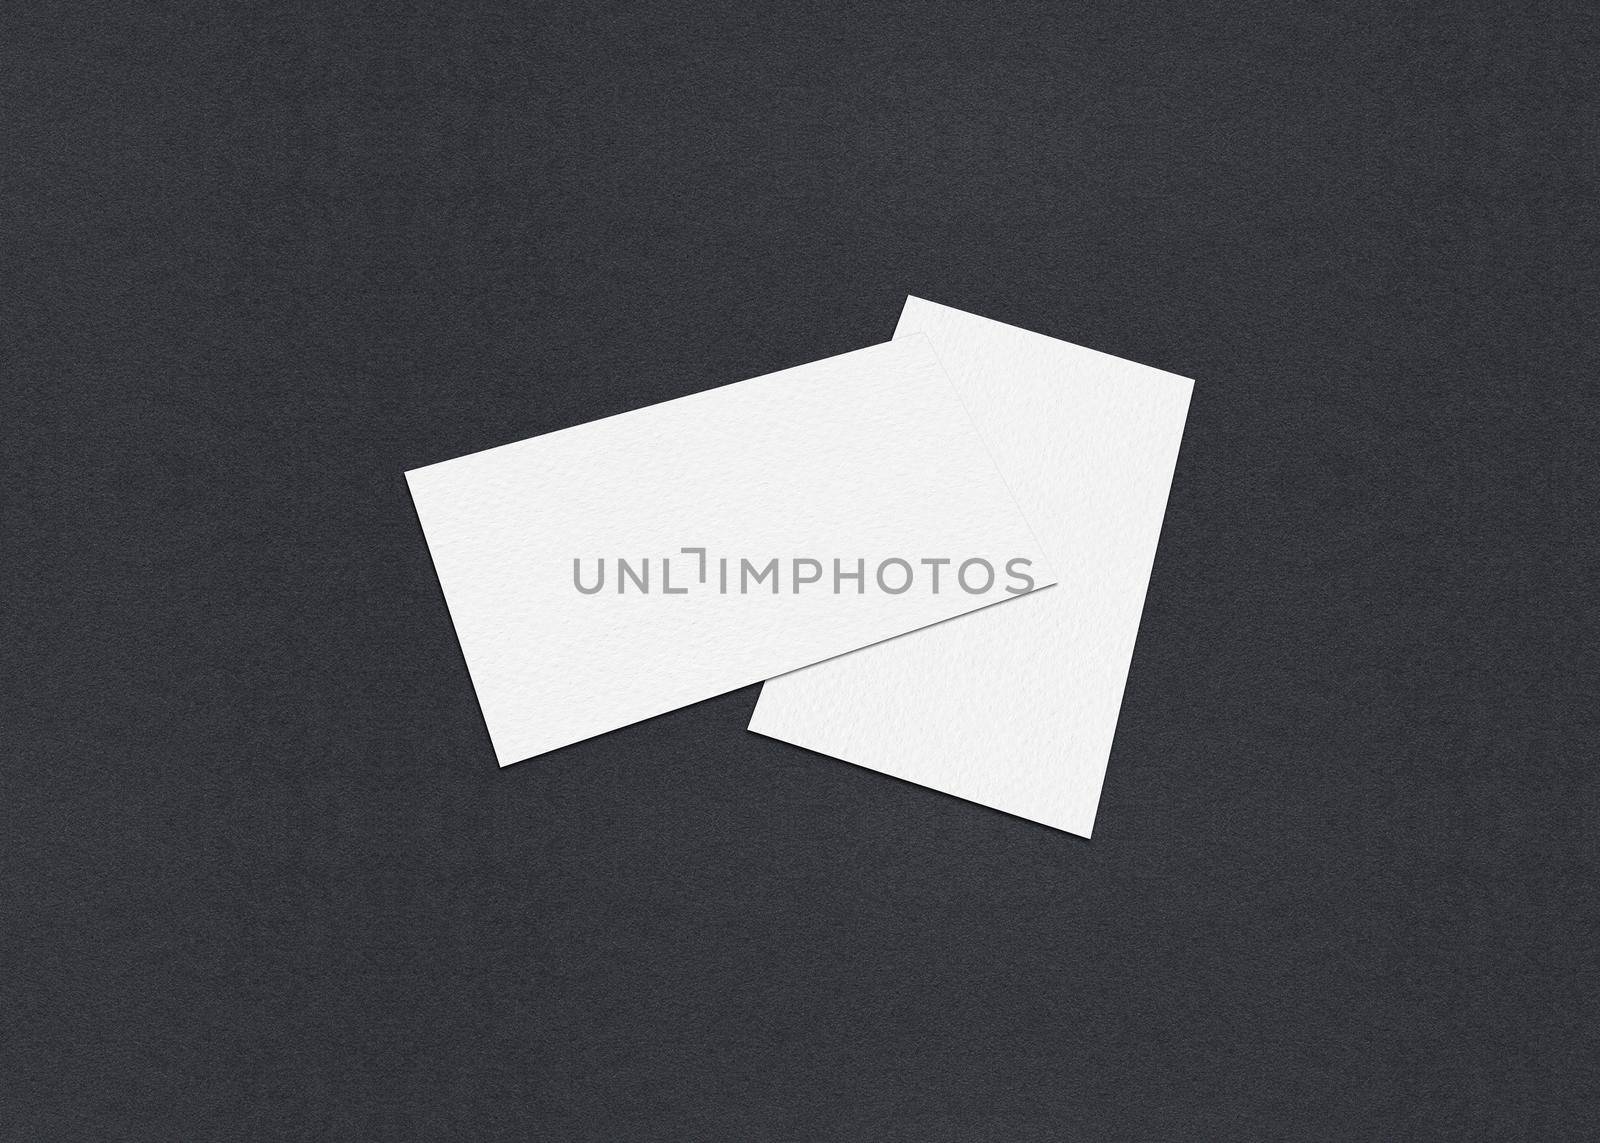 Blank white Business card mockup stacks at grey textured paper background. by shaadjutt36